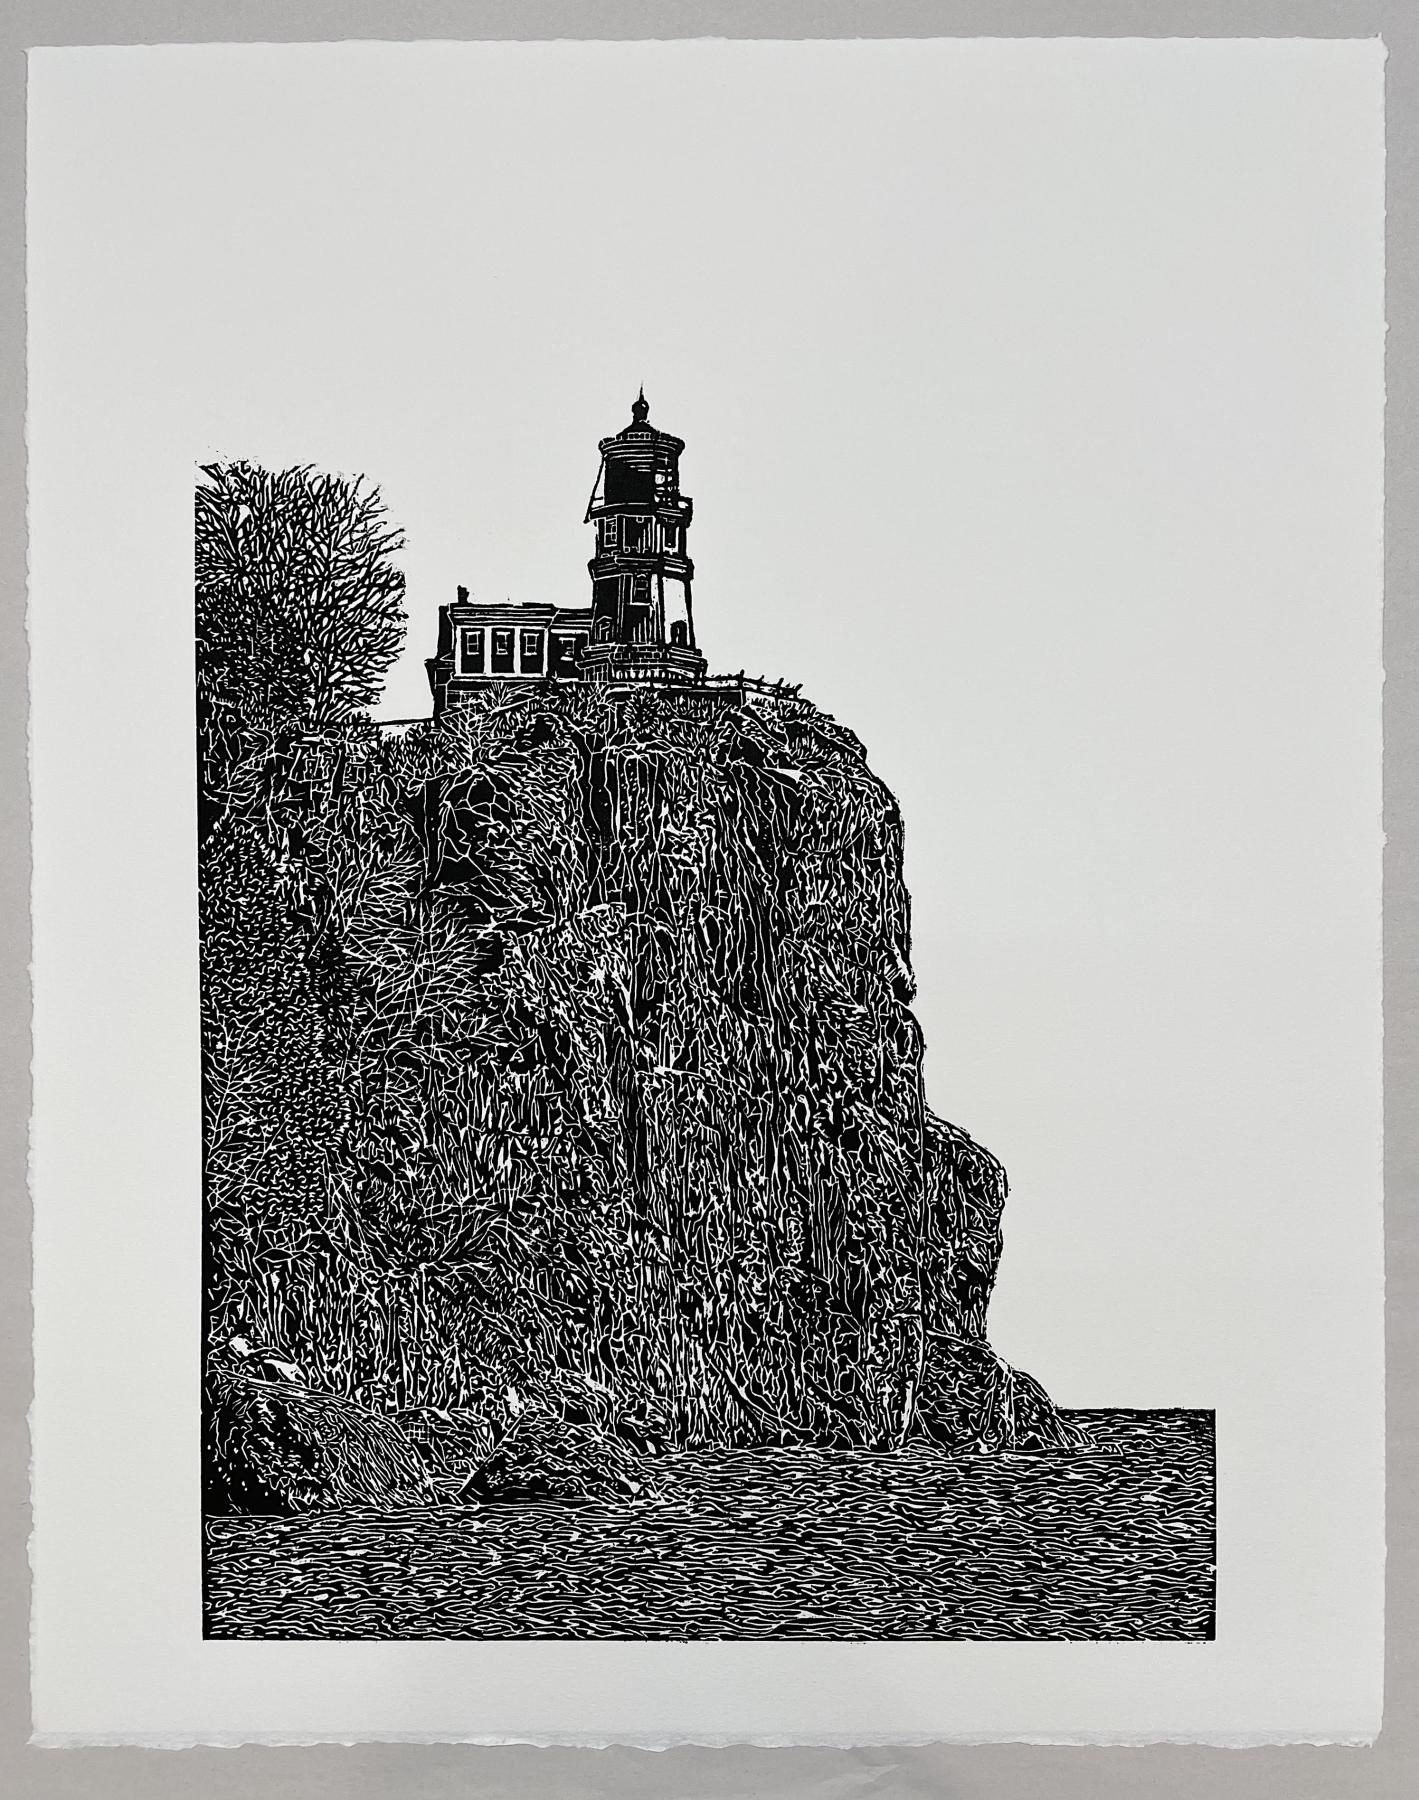 A carved image of Split Rock Lighthouse located on Lake Superior. It is a black and white, carved relief print that is incredibly dense and detailed depicting the light house, rocky ledge, and shoreline.